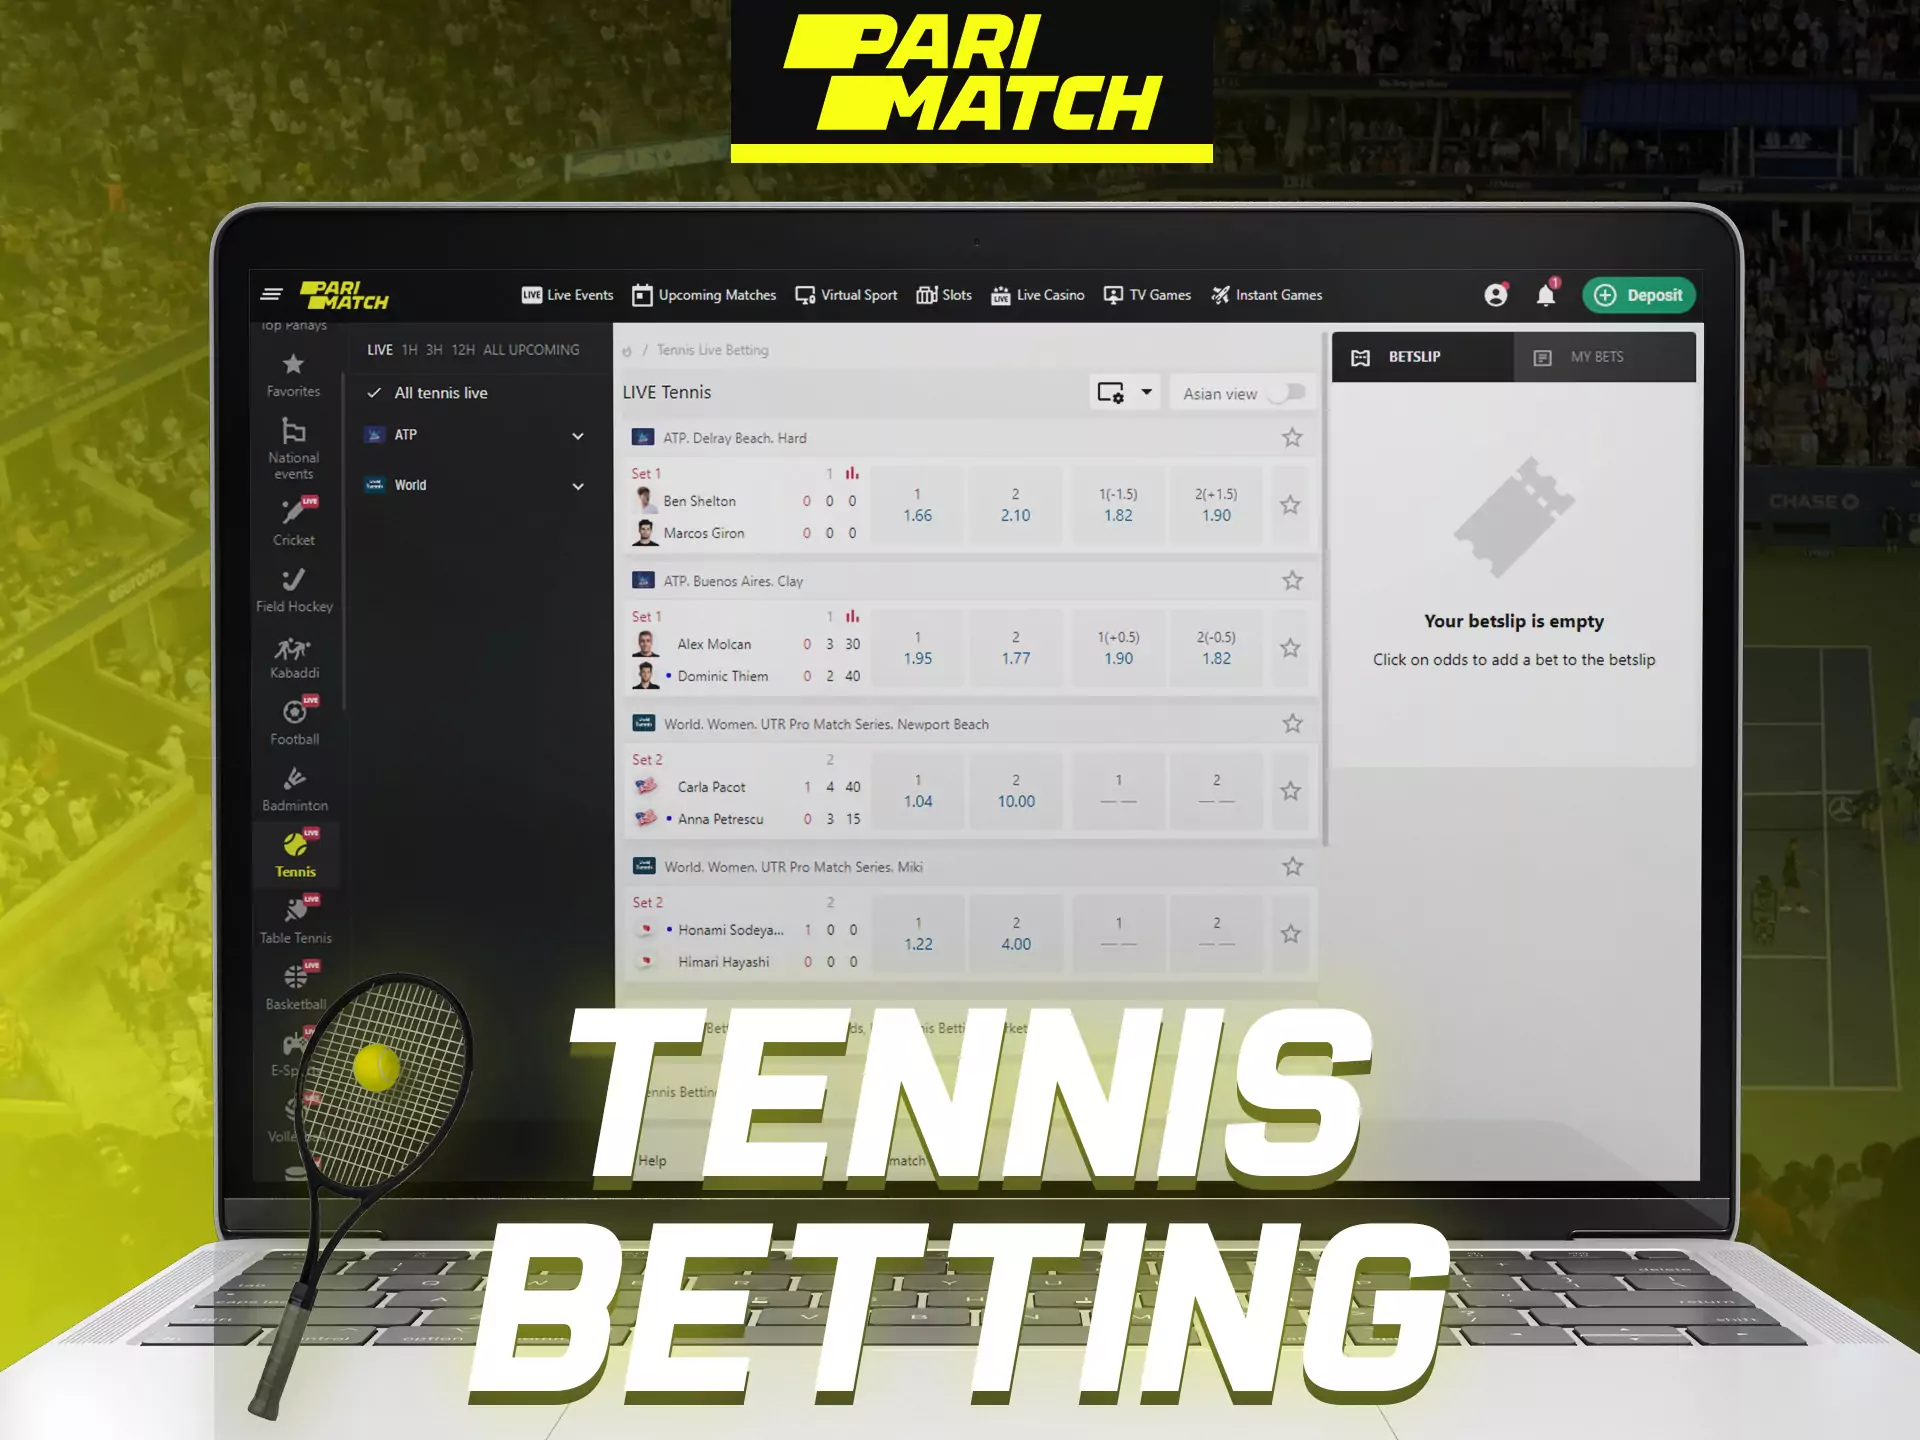 Bet on best tennis players and win money at Parimatch.